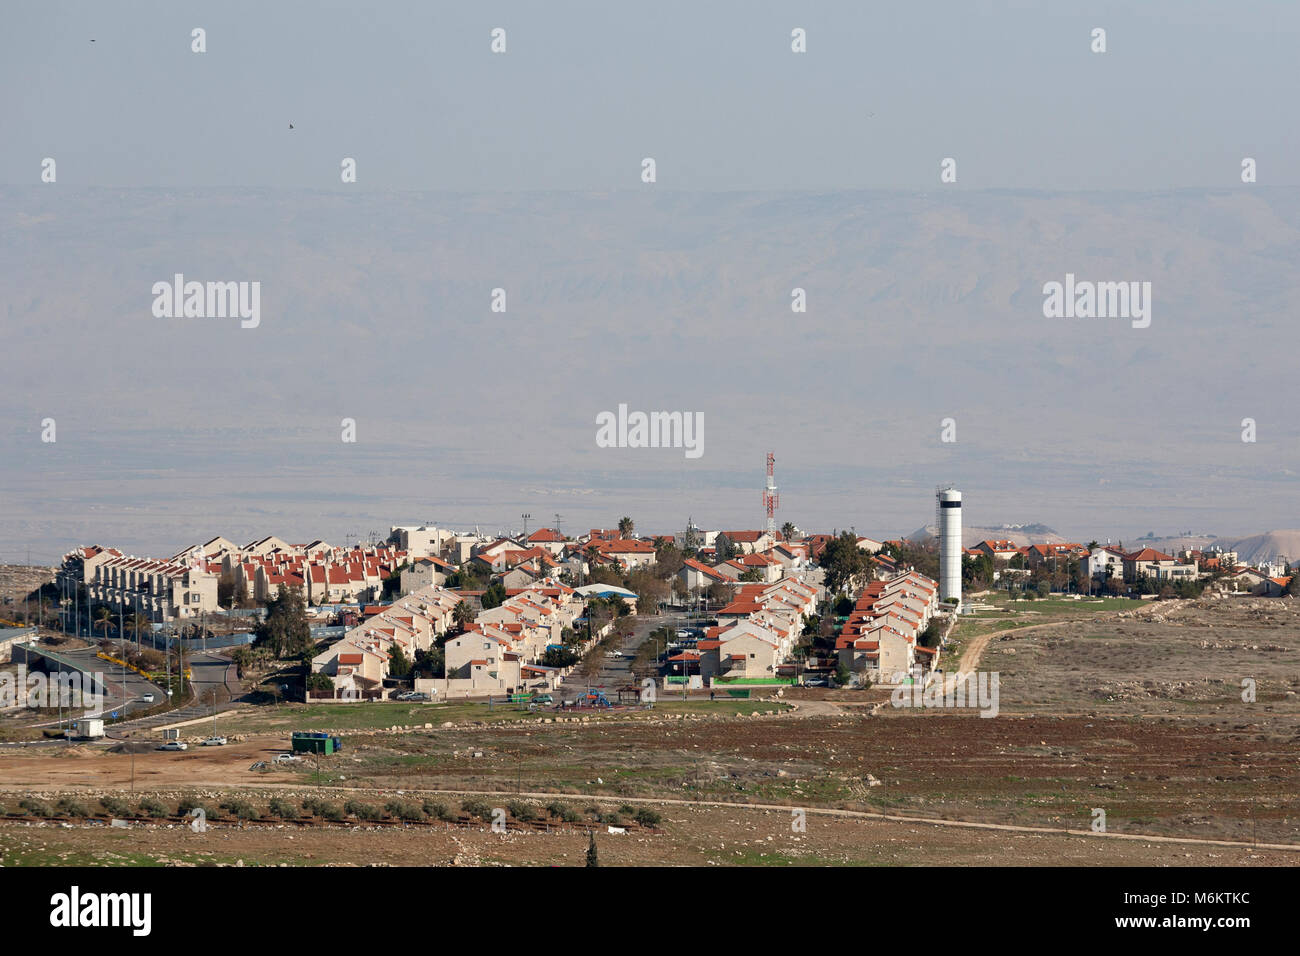 Jerusalem, Palestine, January 12, 2011: Jewish settlement built on the grounds which are recognized as Palestinian Occupied Territories by internation Stock Photo